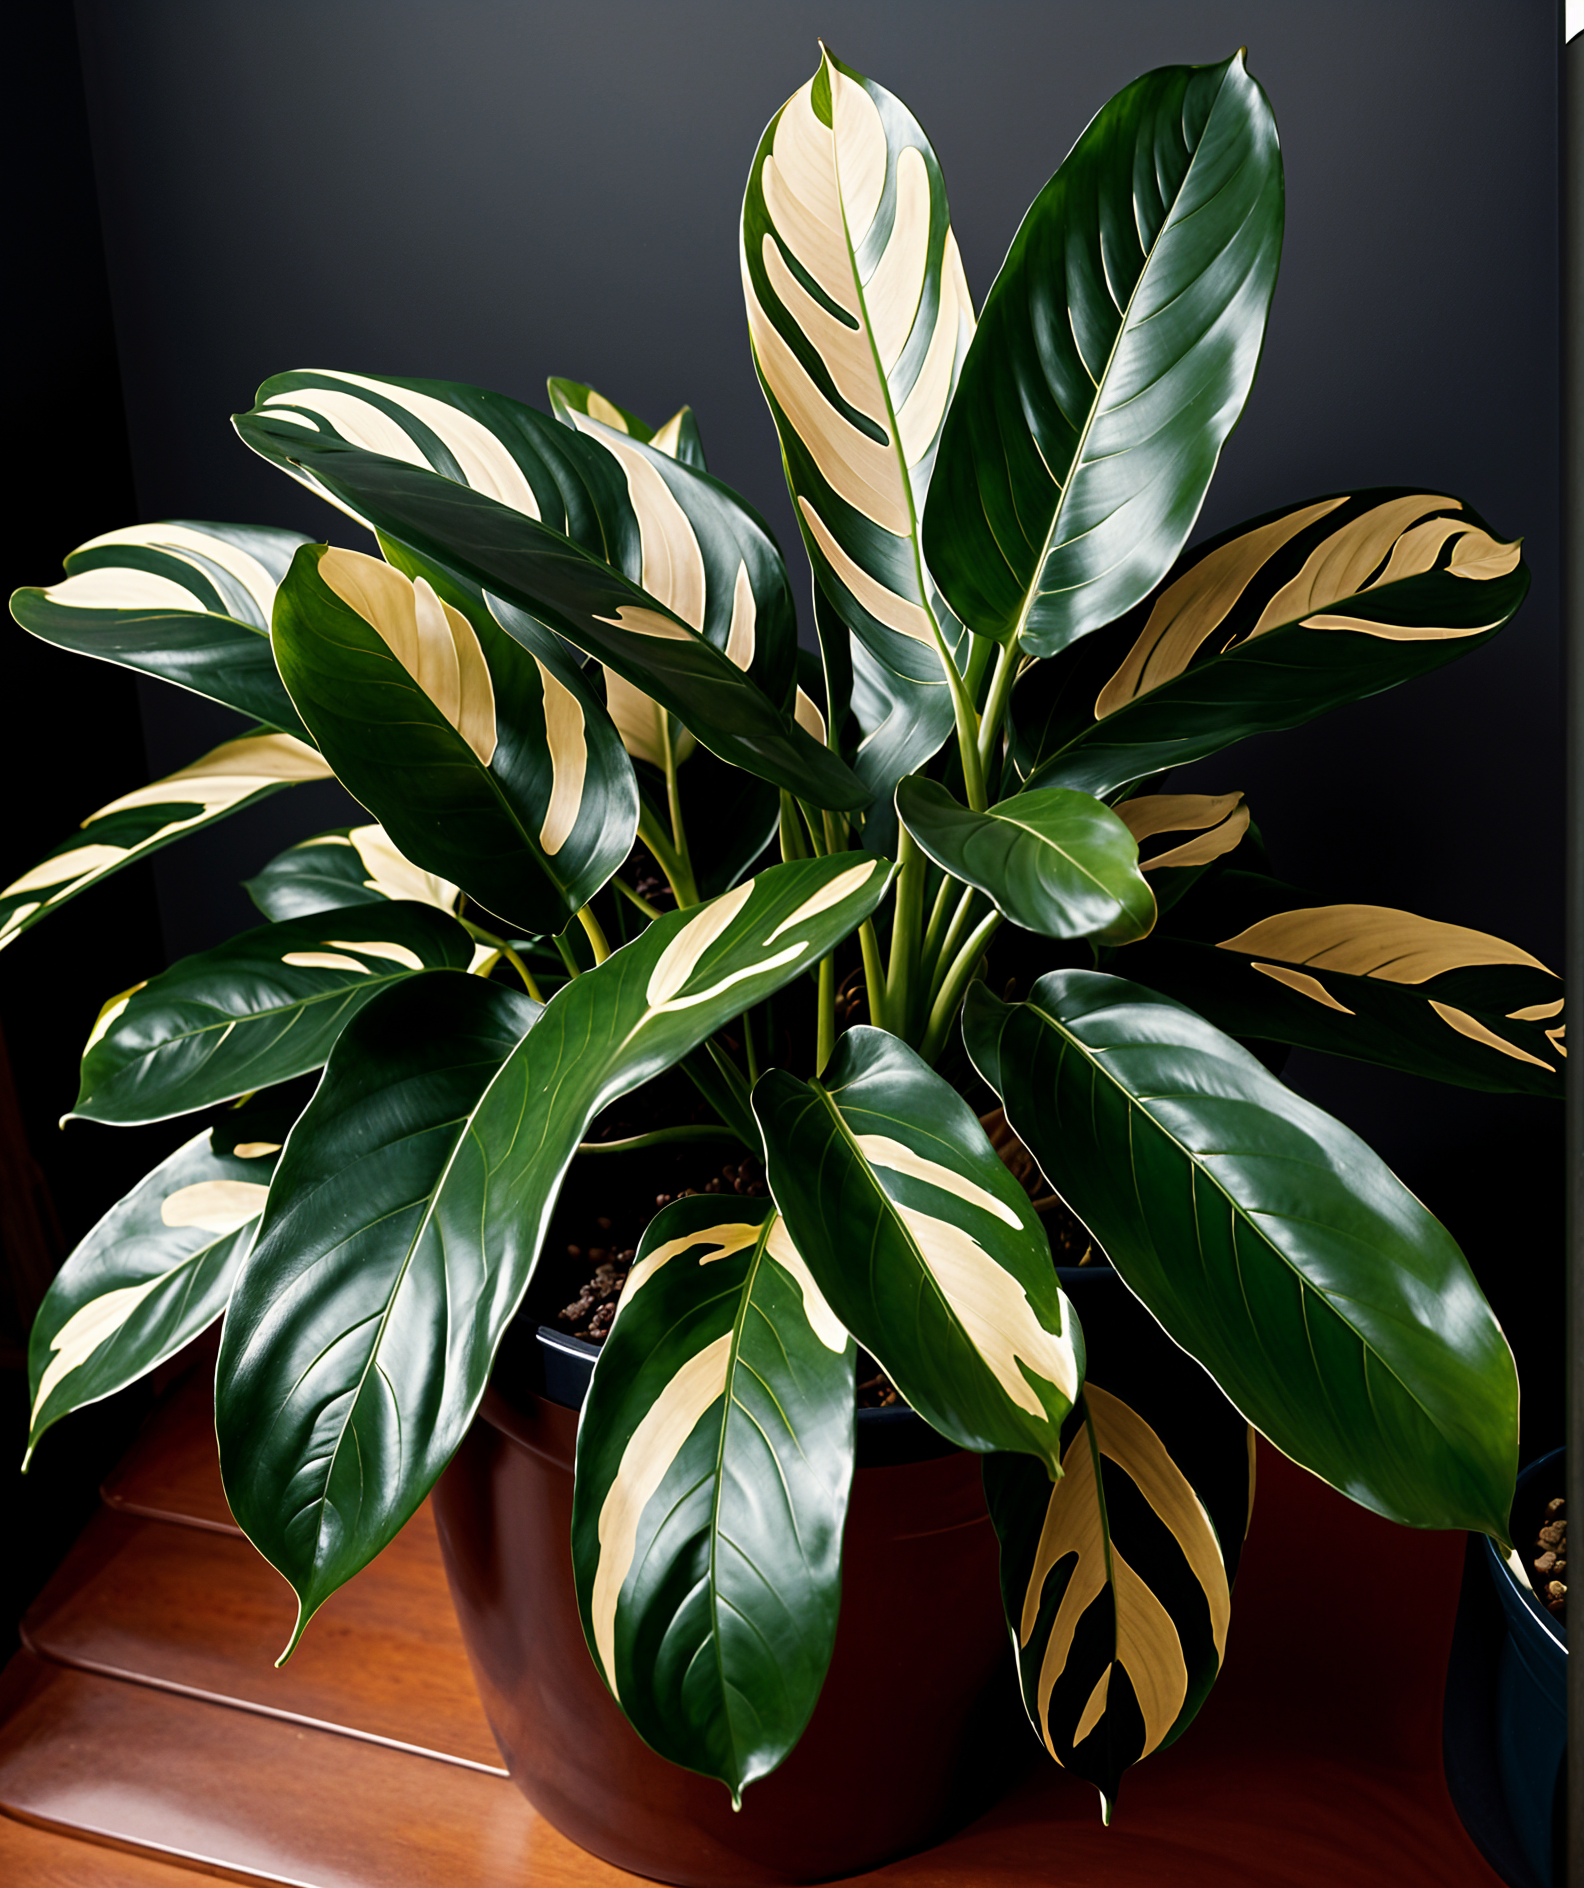 Ctenanthe lubbersiana plant with vibrant leaves in a planter, set against a dark background indoors.